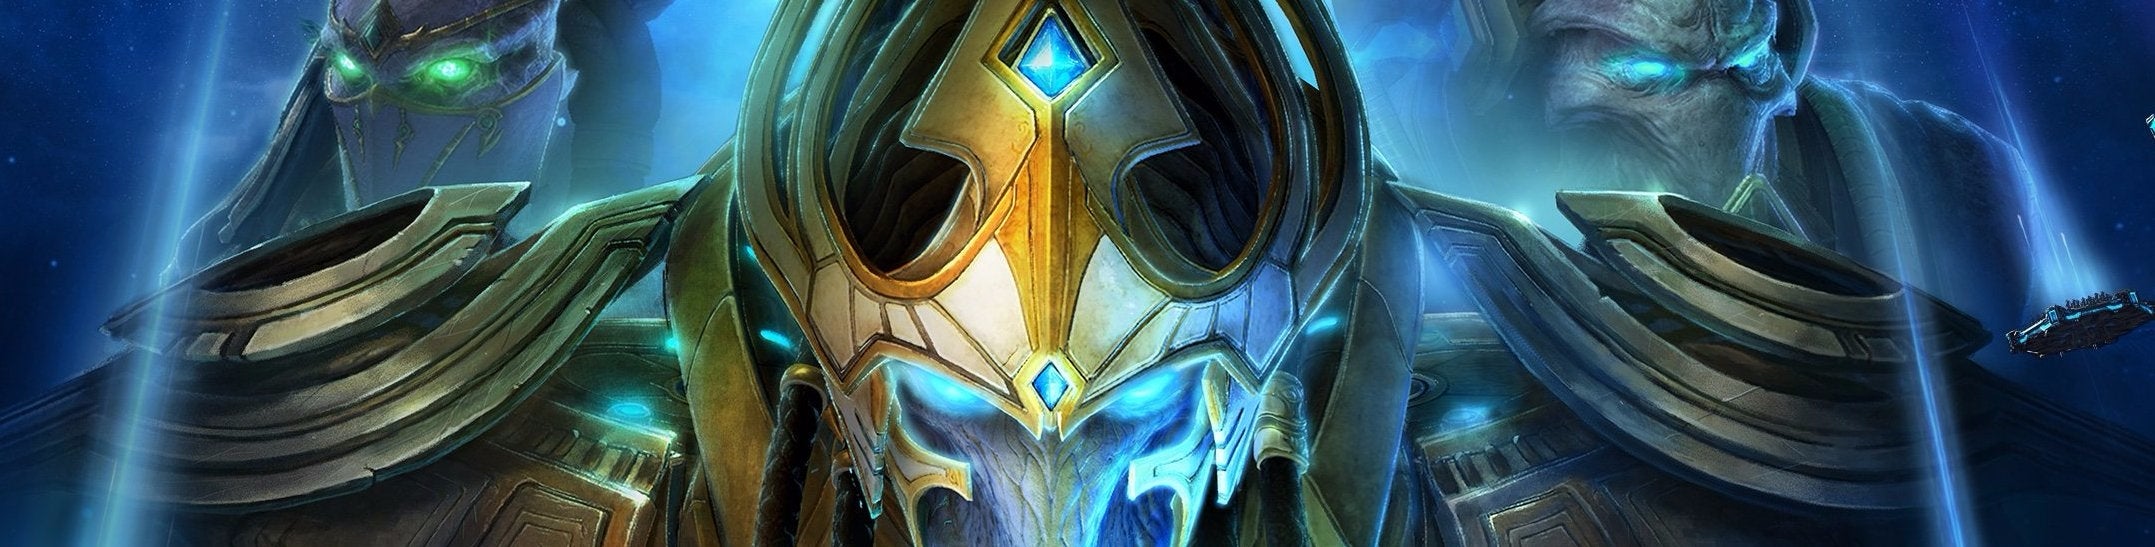 Image for RECENZE StarCraft 2: Legacy of the Void